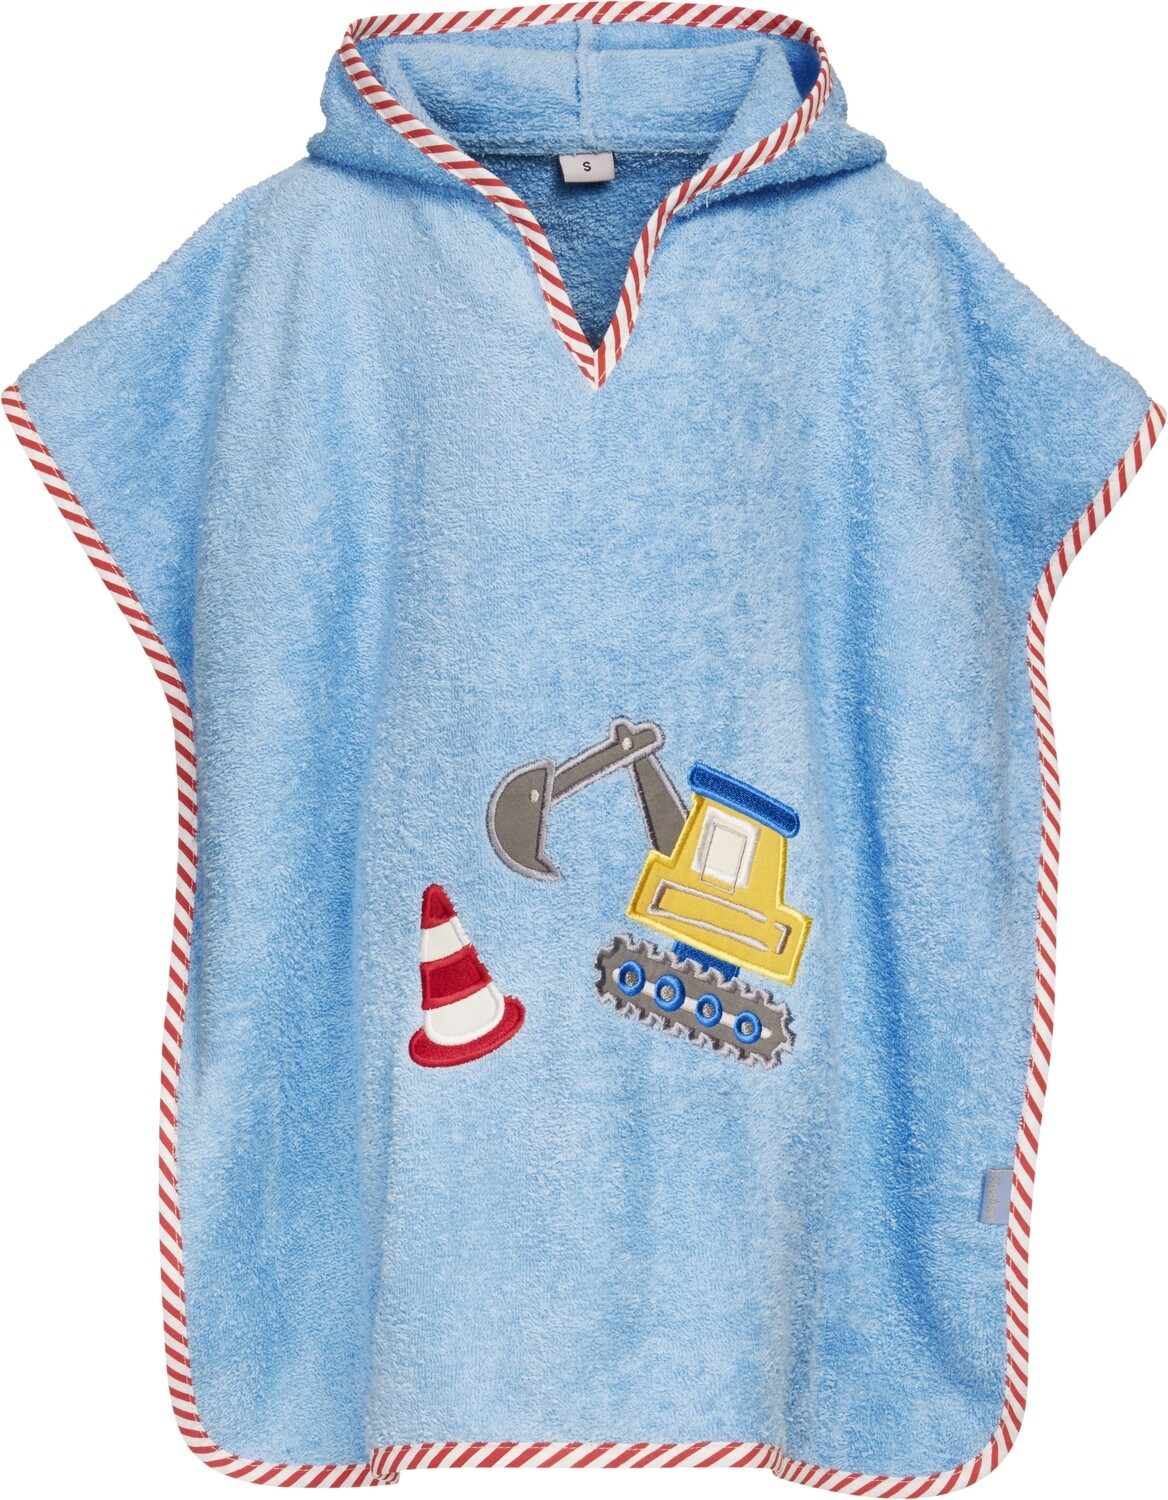 Badstof Poncho - Terry Digger - blauw